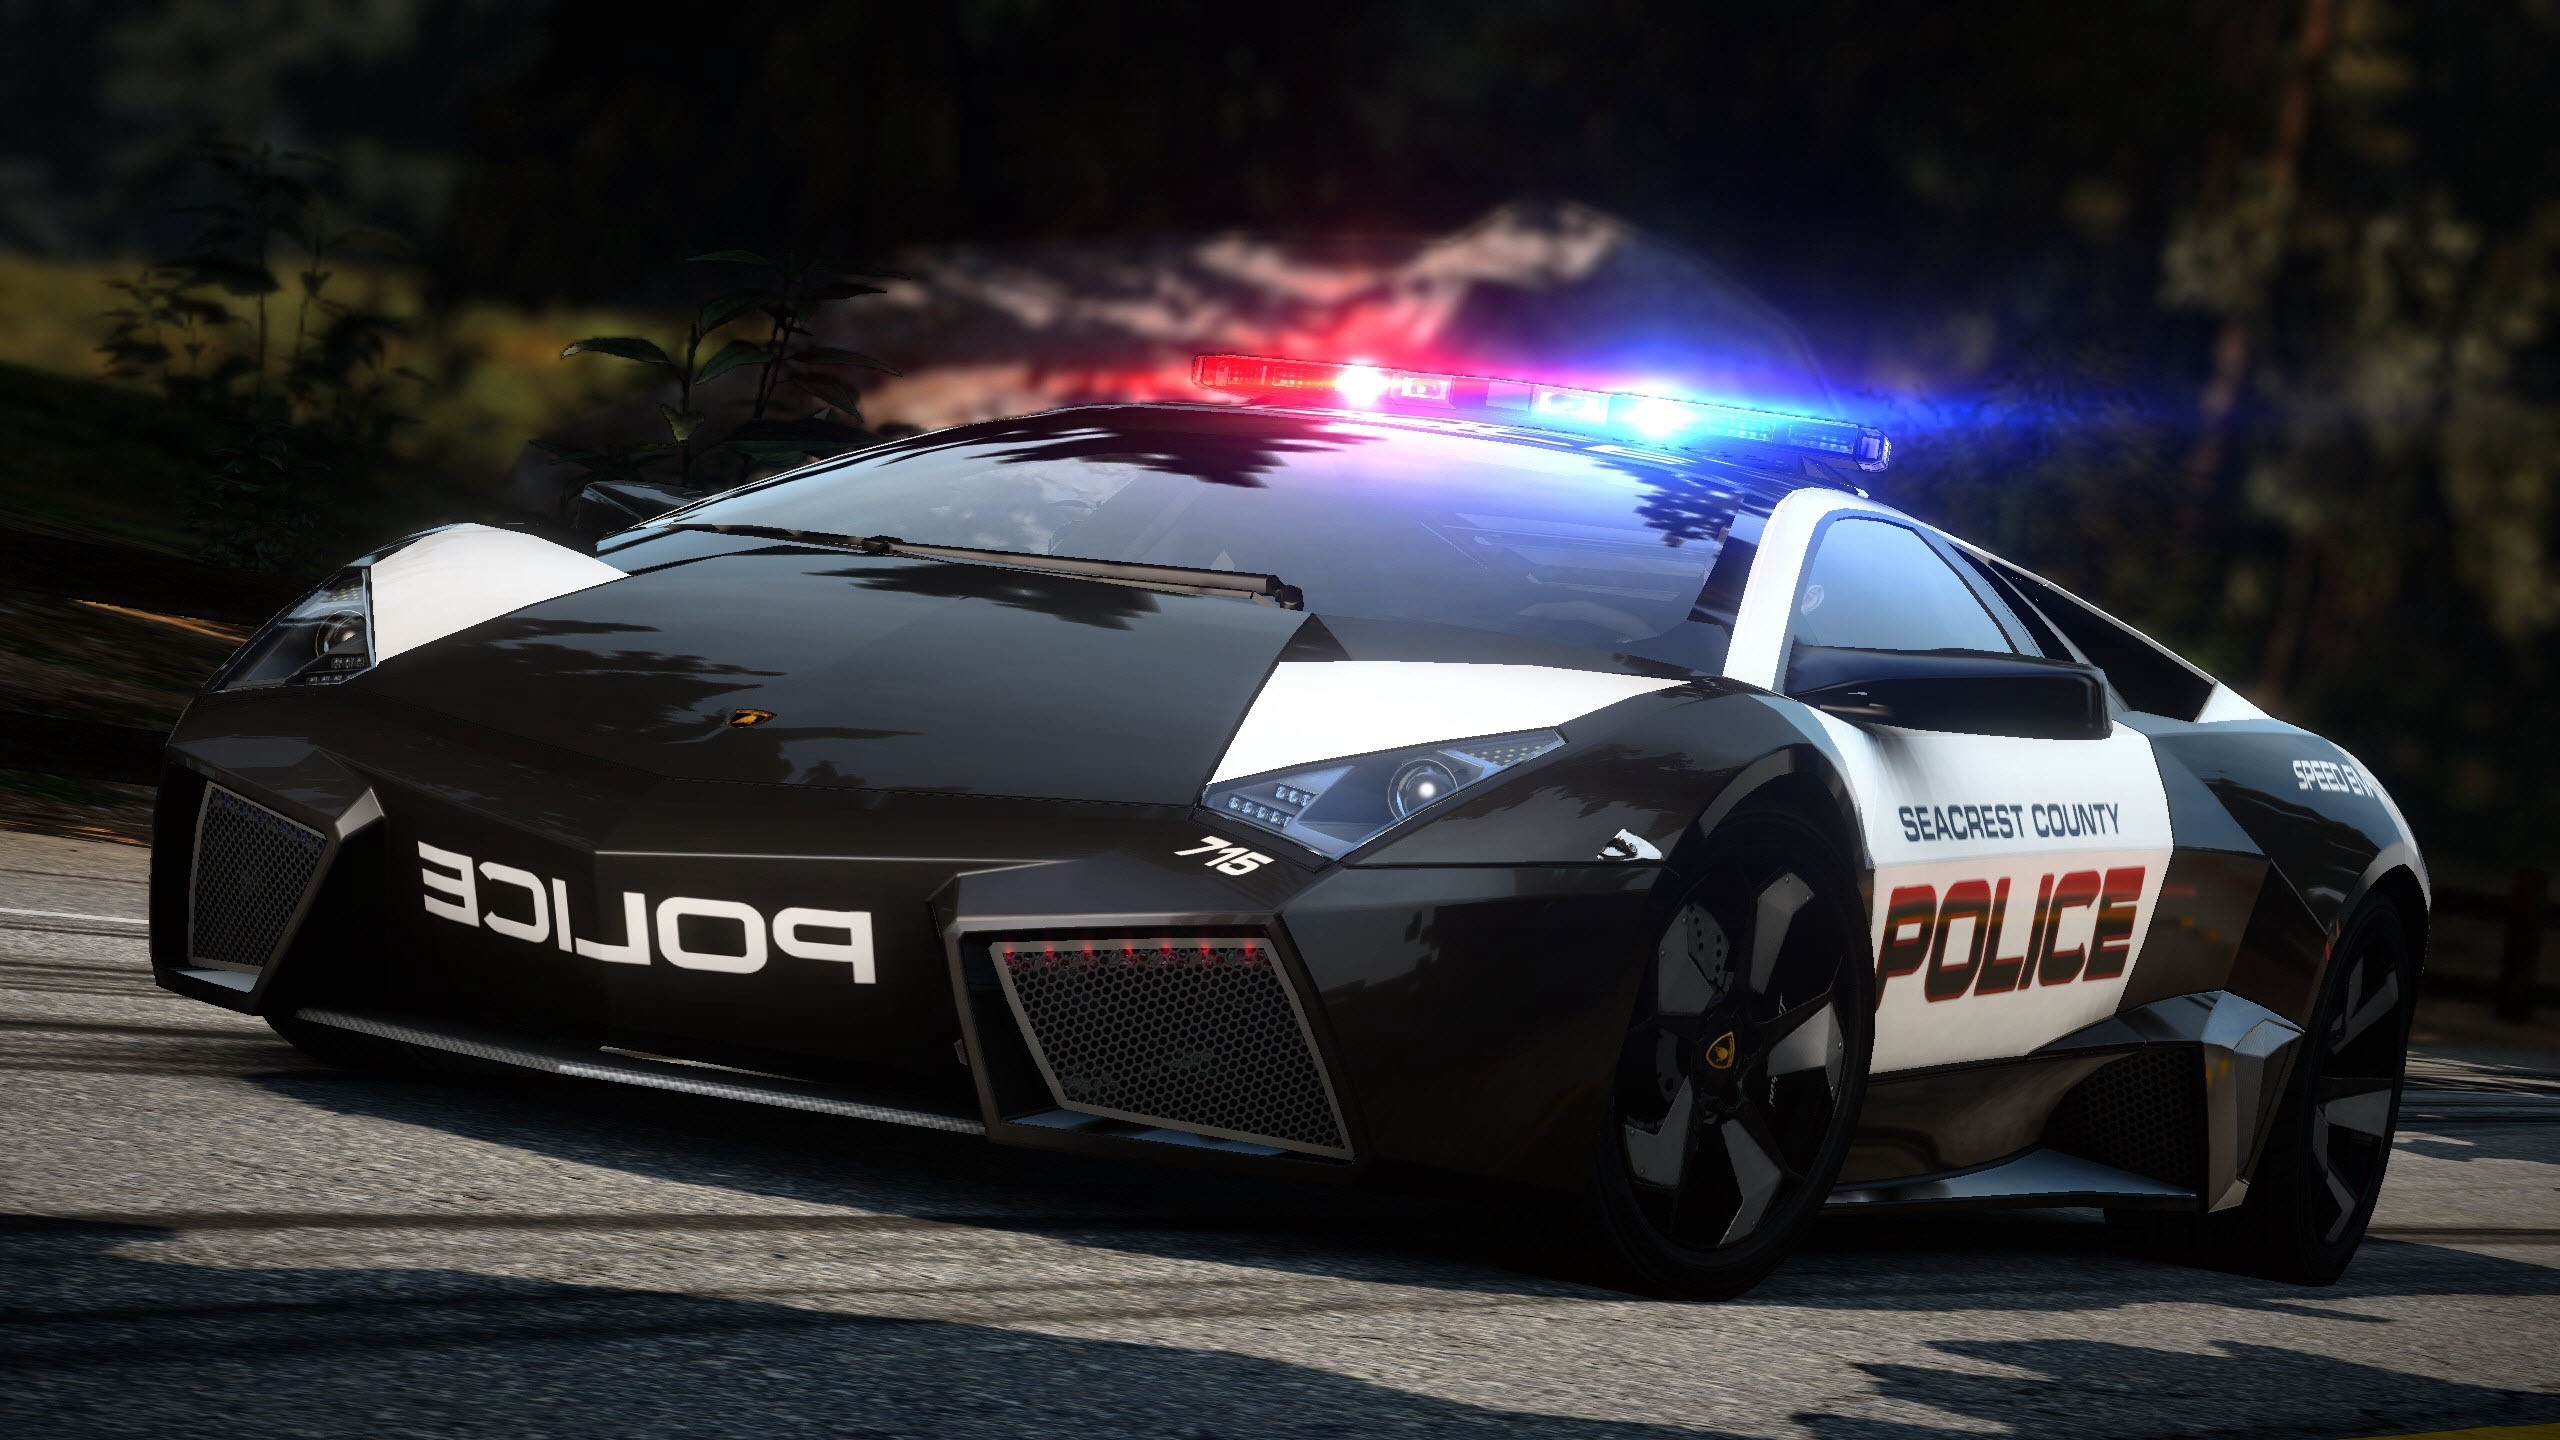 Wallpaper Nfs Need For Speed Police Car